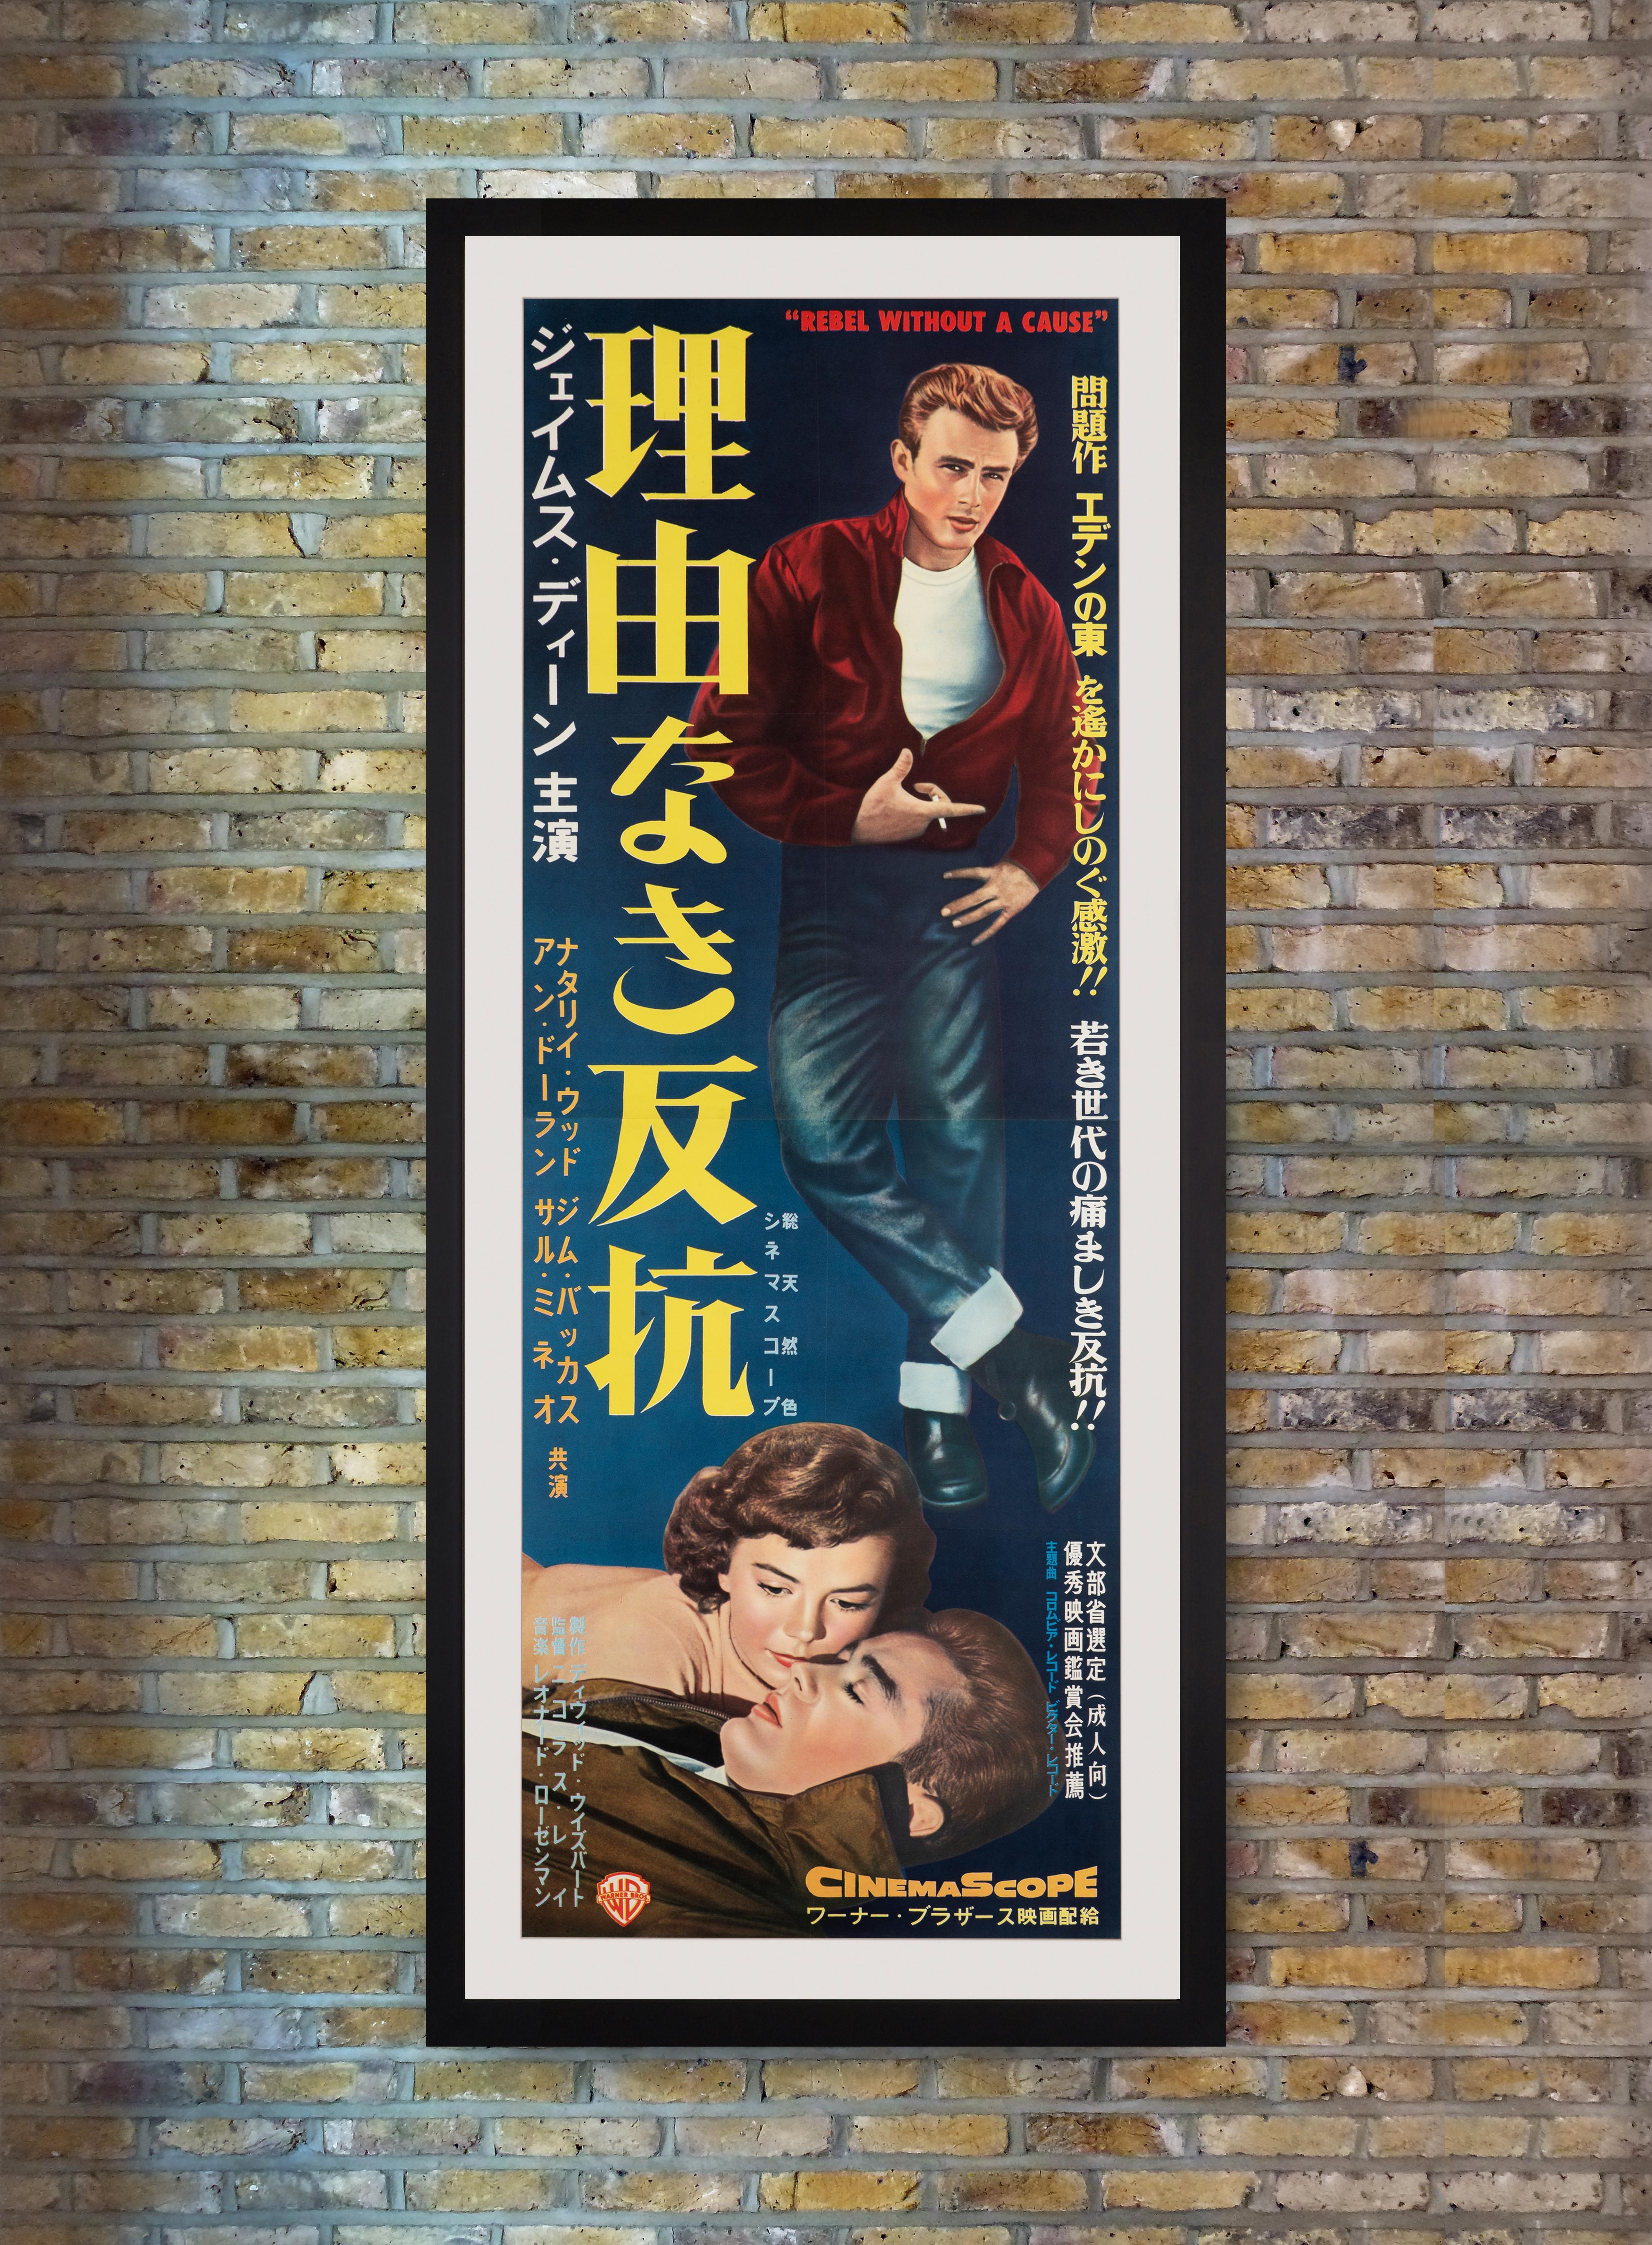 James Dean 'Rebel Without A Cause' Original Vintage Movie Poster, Japanese, 1956 - Print by Unknown